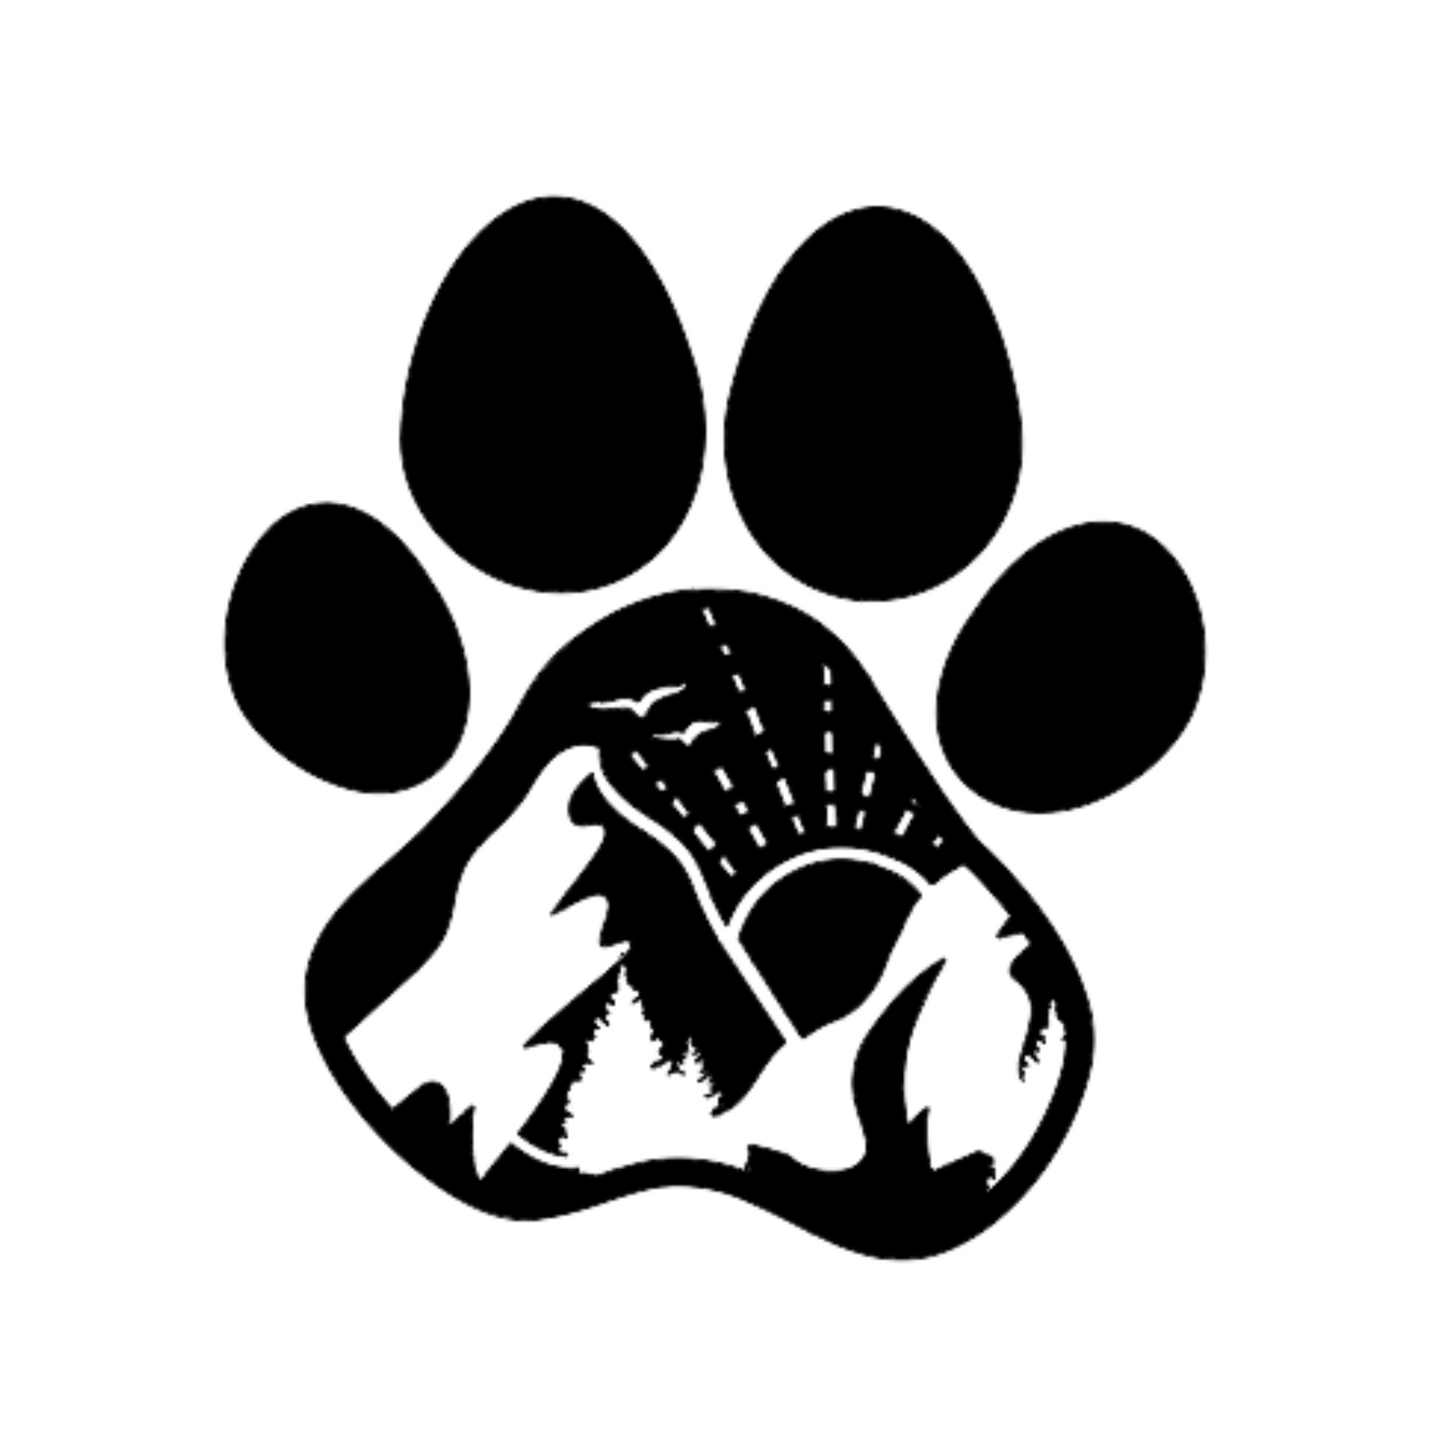 Paw Print design with mountains, trees, sun, and birds.